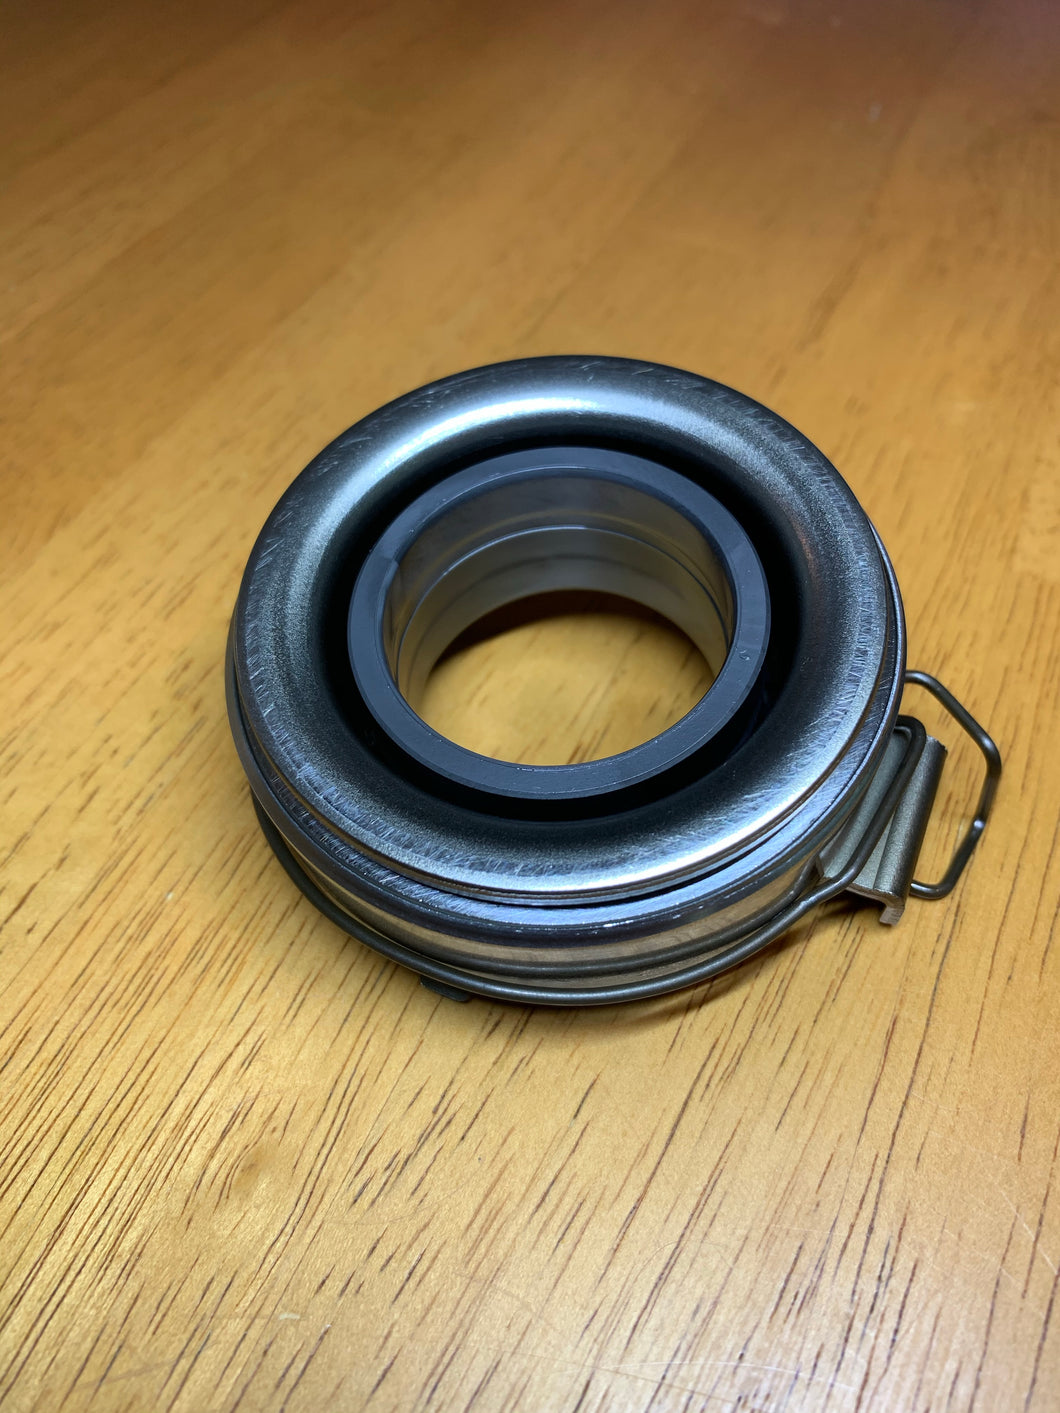 E153 Clutch Throw Out Release Bearing